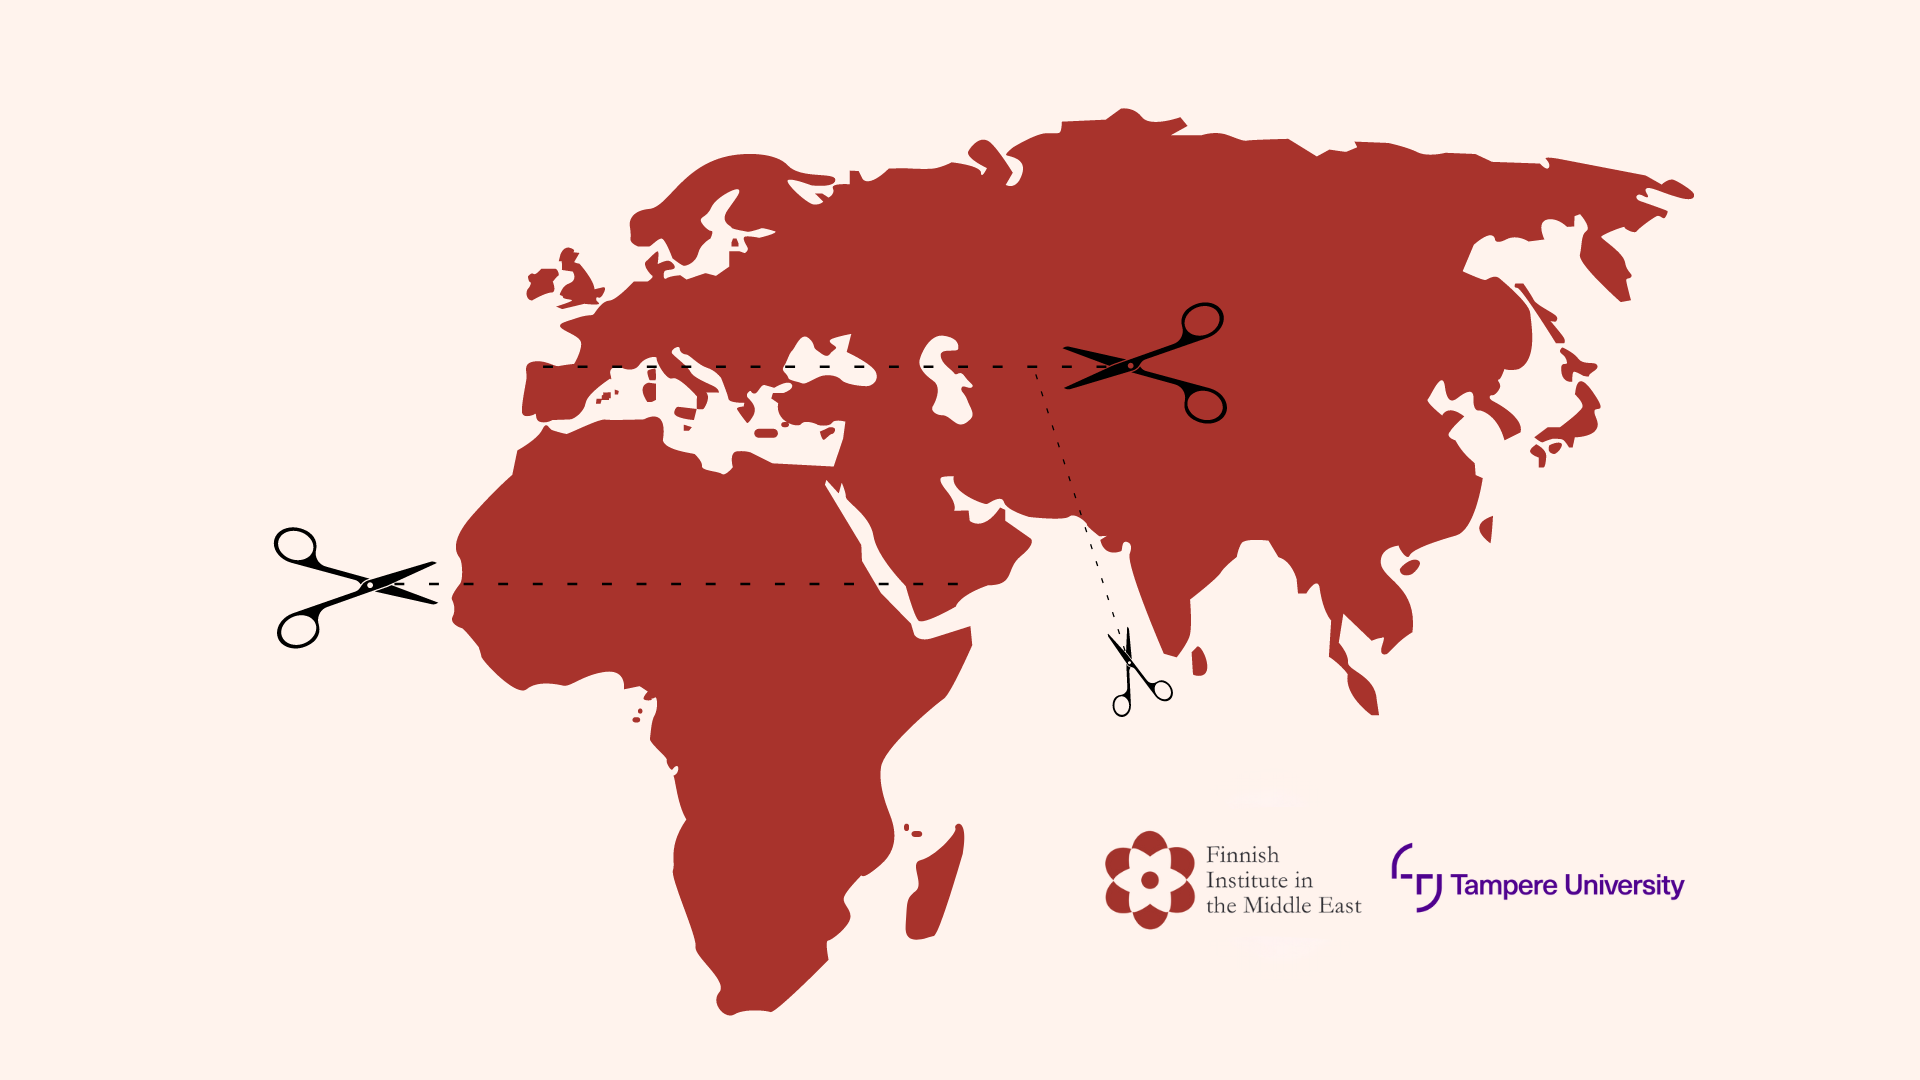 World map with FIME and Tampere University logos. Pairs of scissors and dotted lines outline the Middle East and North Africa on the map.